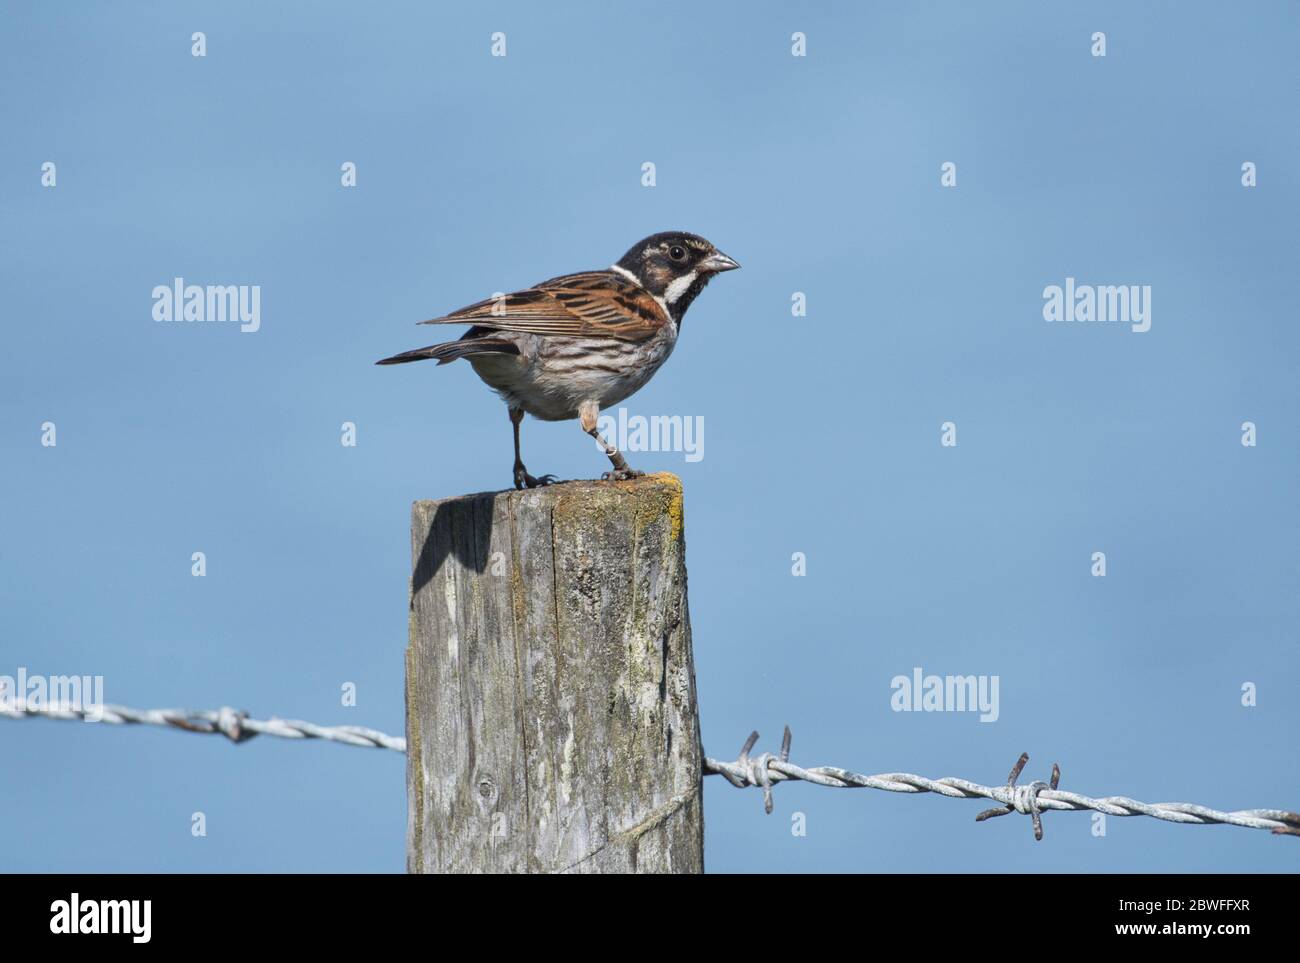 Male reed bunting (Emberiza schoeniclus) on wooden fence post Stock Photo